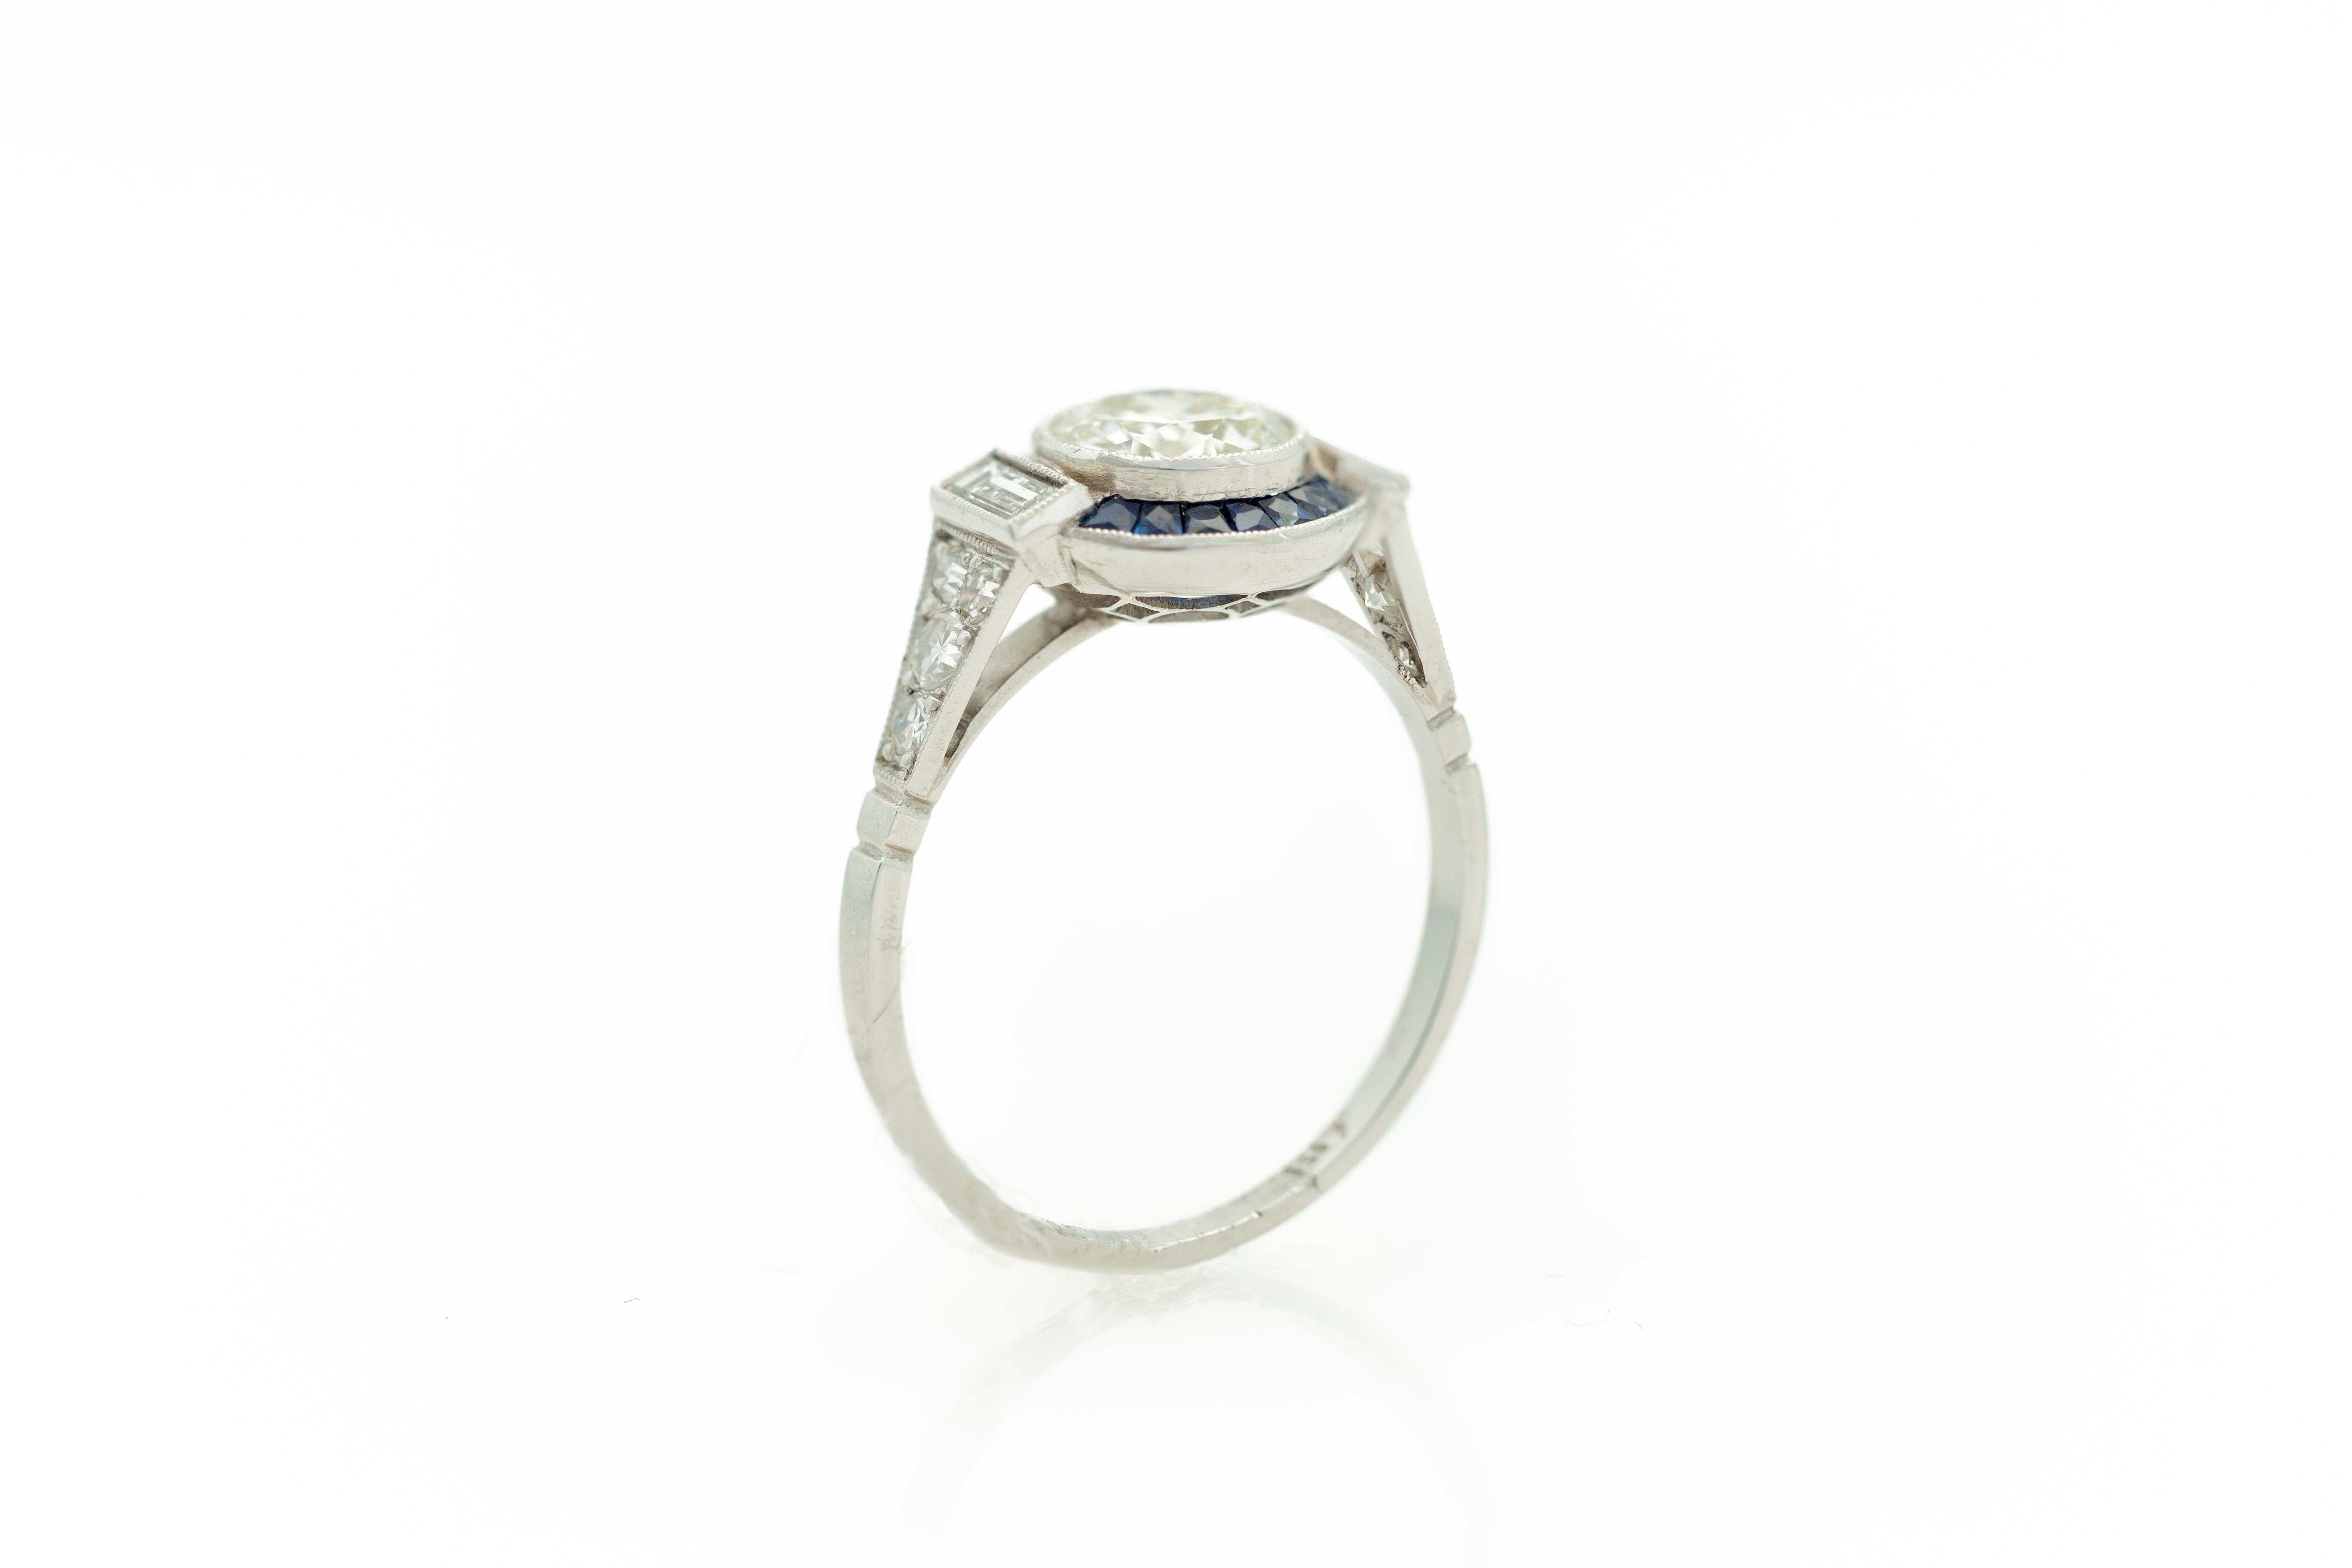 Old European Cut Art Deco Style 1960s 1.11 Carat Diamond Ring with Sapphire Halo in Platinum